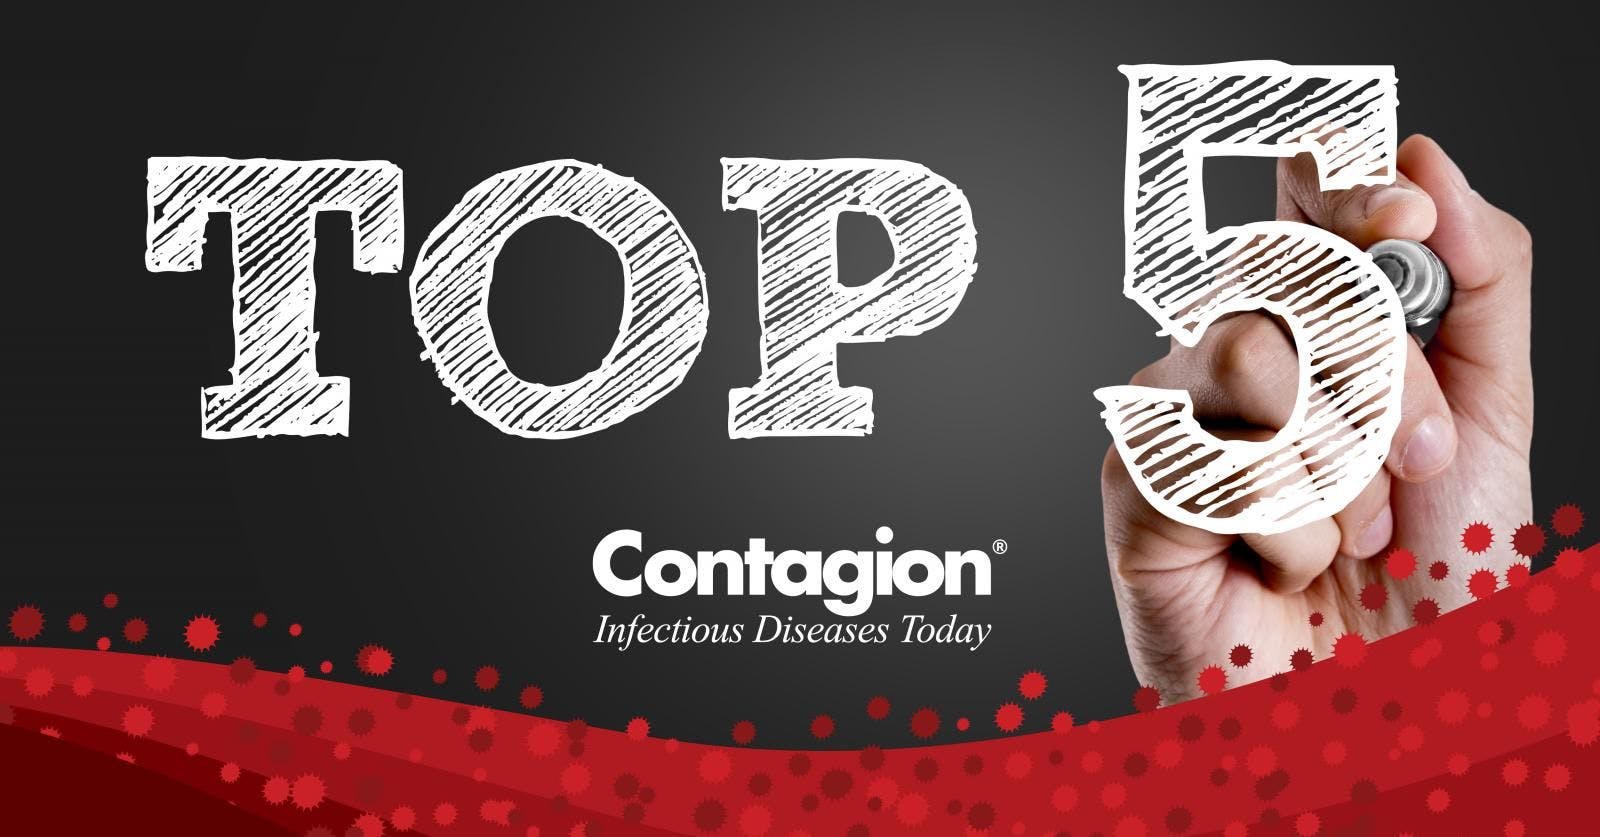 Top Infectious Disease News of the Week&mdash;October 6, 2019